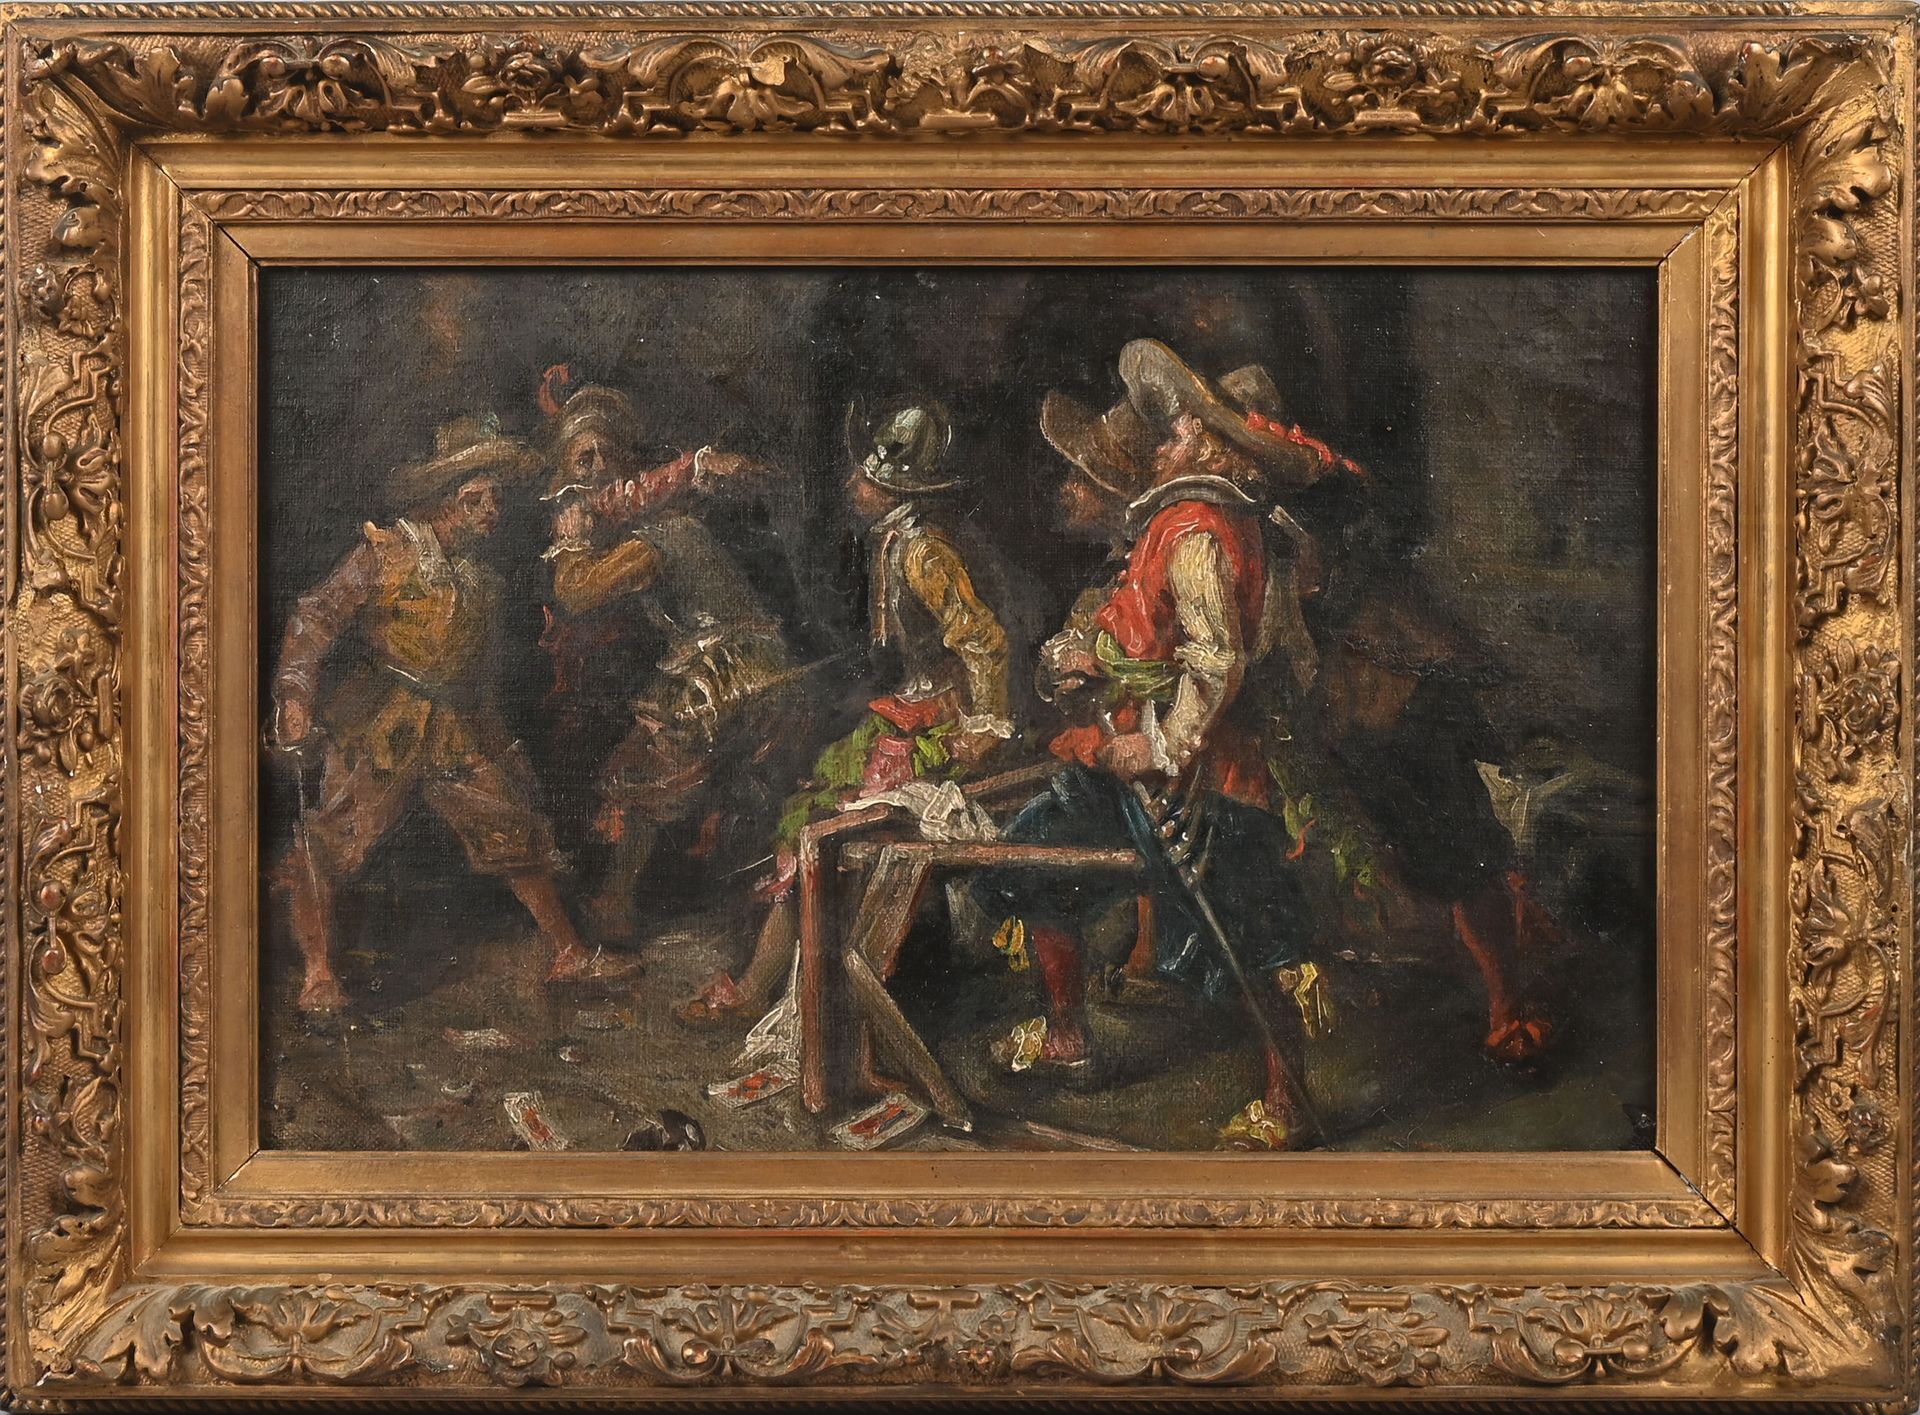 Null DIONET ? - School of the XIXth century
The Rixe
Oil on canvas
Wooden frame &hellip;